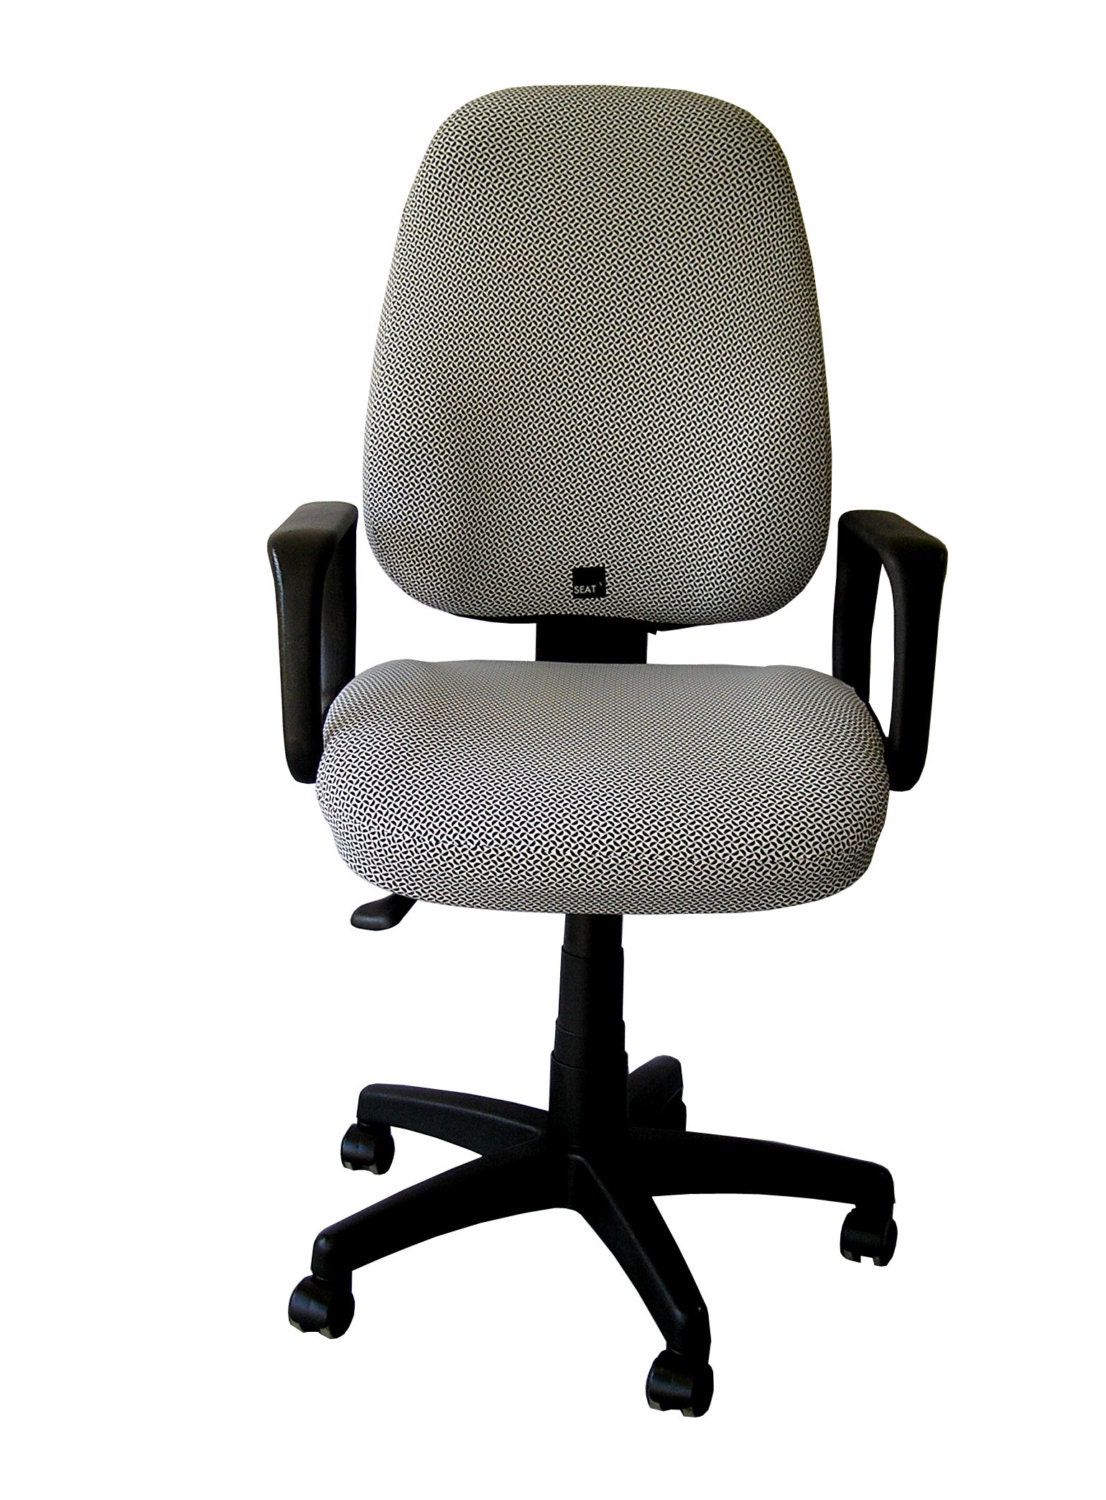 Seat X The office chair cover one size fit all Printed